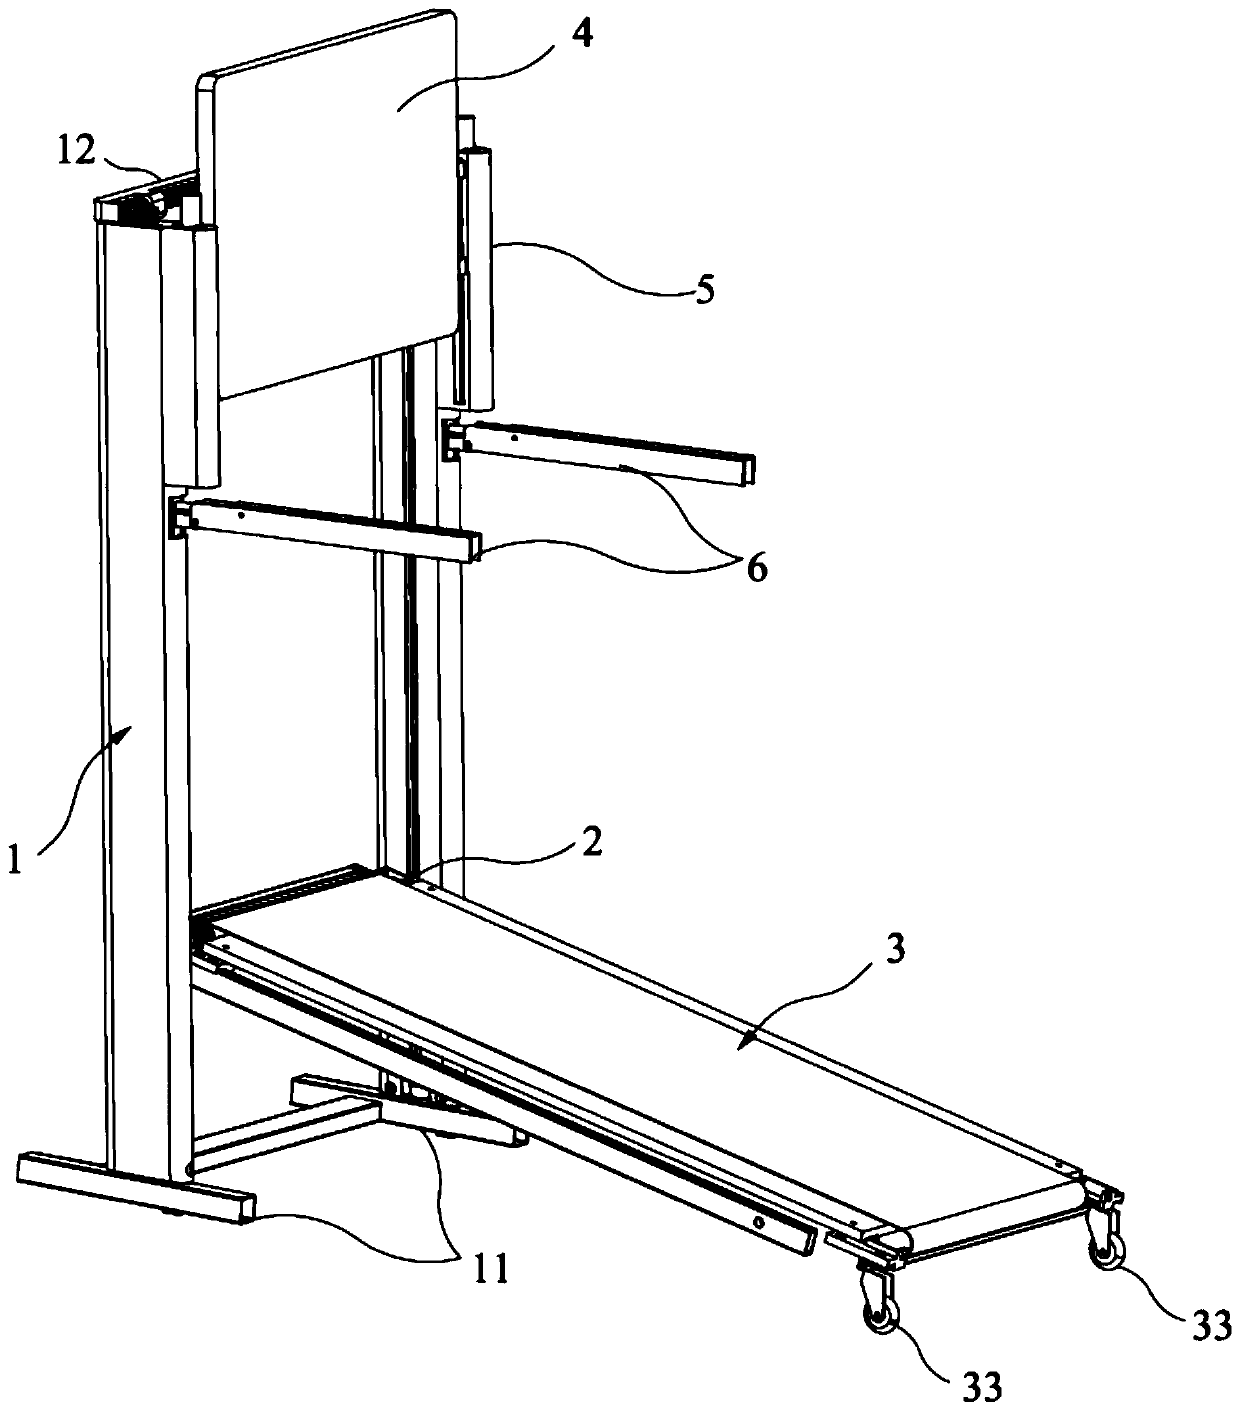 Lifting and folding integrated device of treadmill